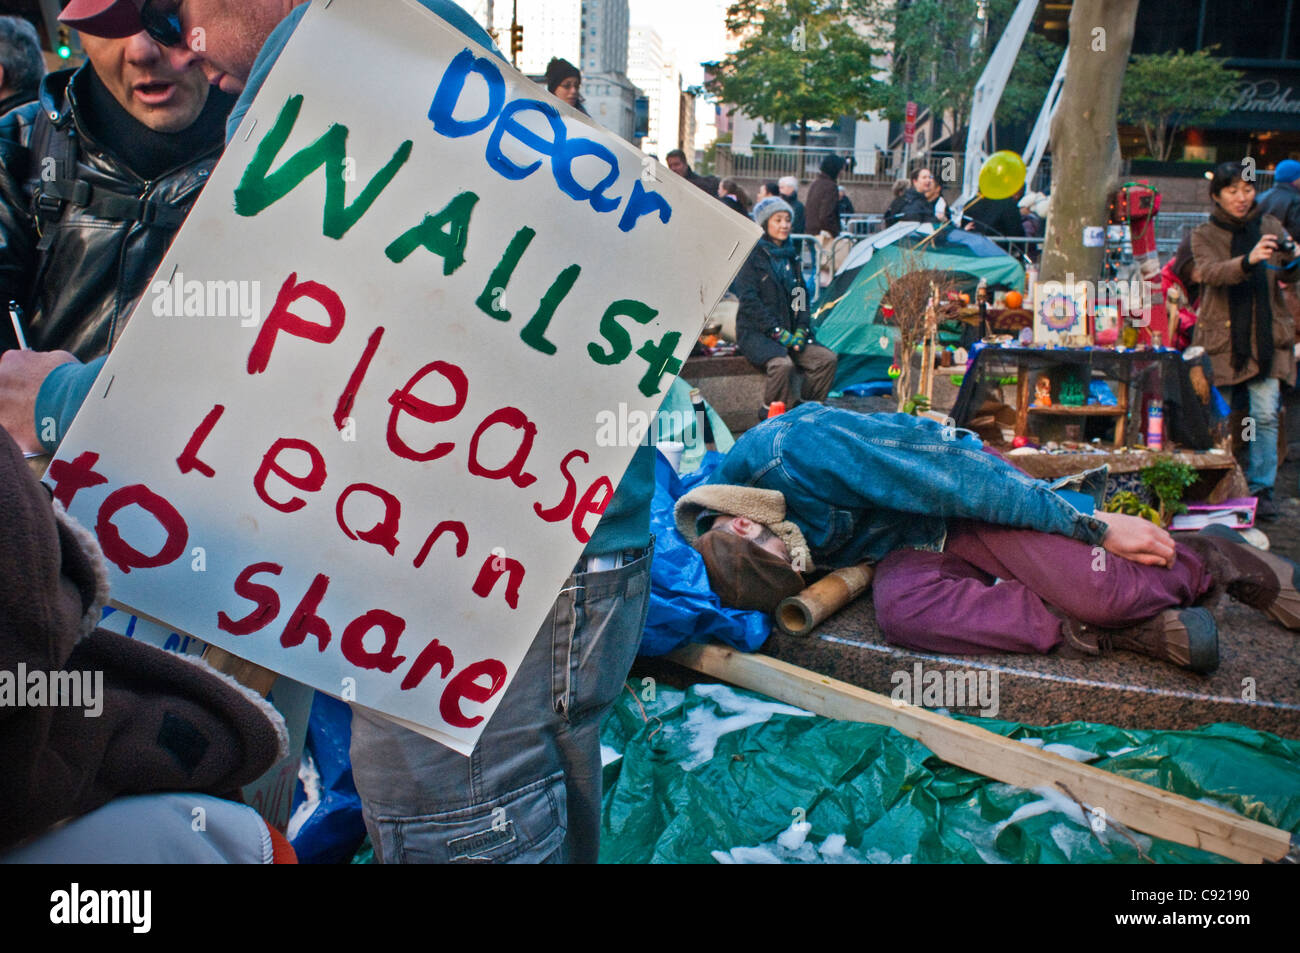 Occupy Wall Street OWS protest demonstration, Zuccotti Park, Manhattan, NYC Stock Photo